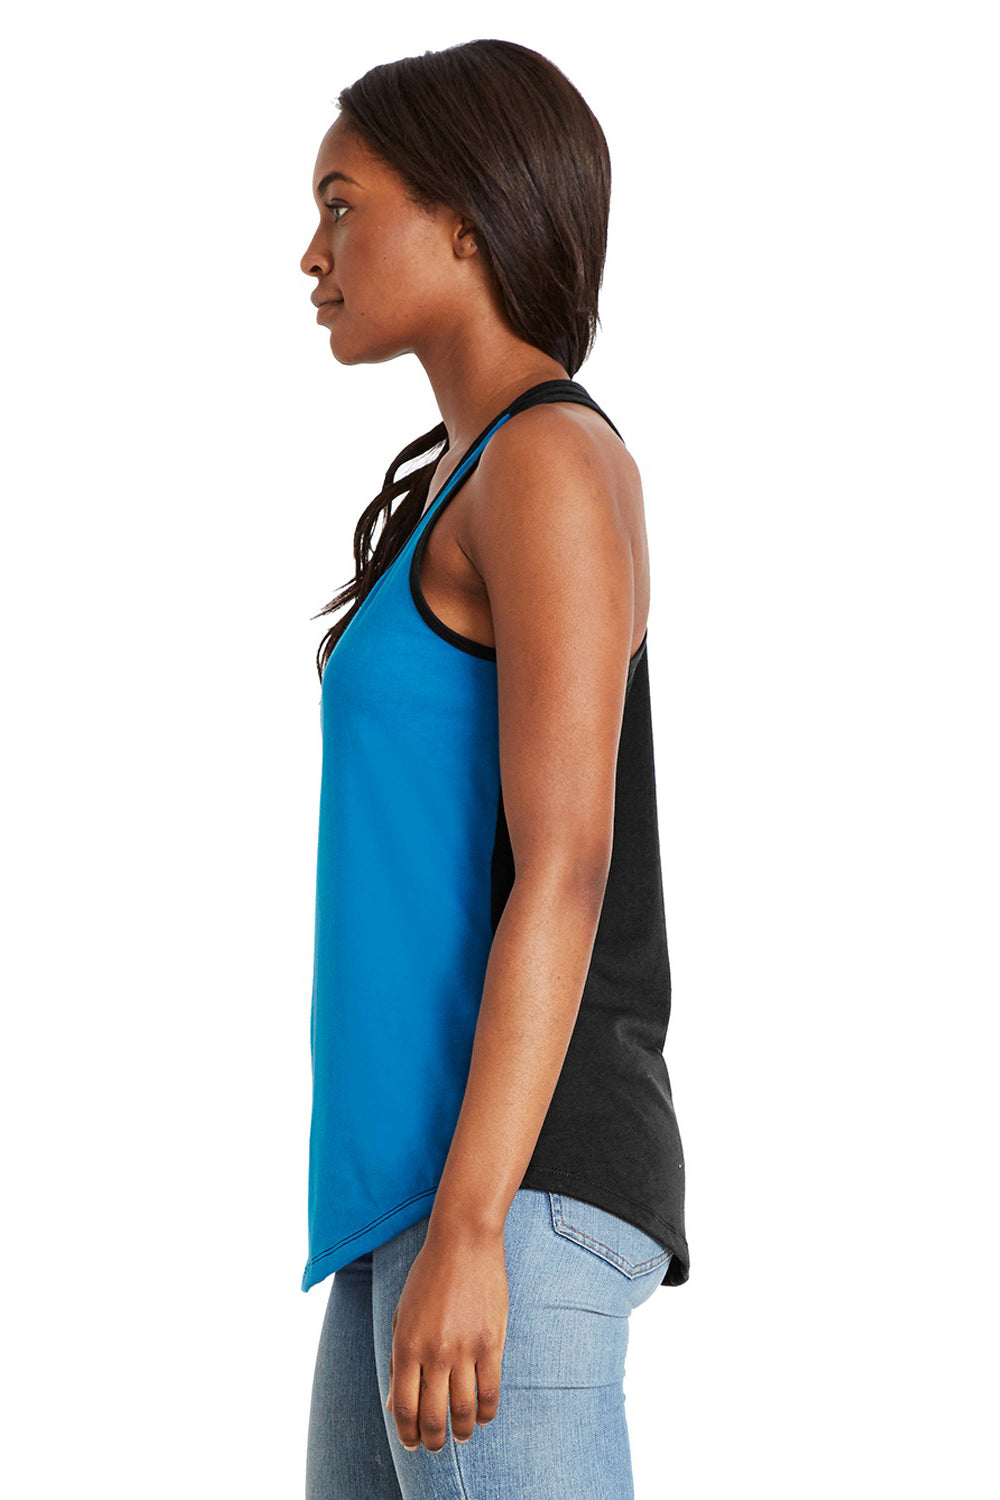 Next Level 1534 Womens Ideal Tank Top Turquoise Blue/Black Side